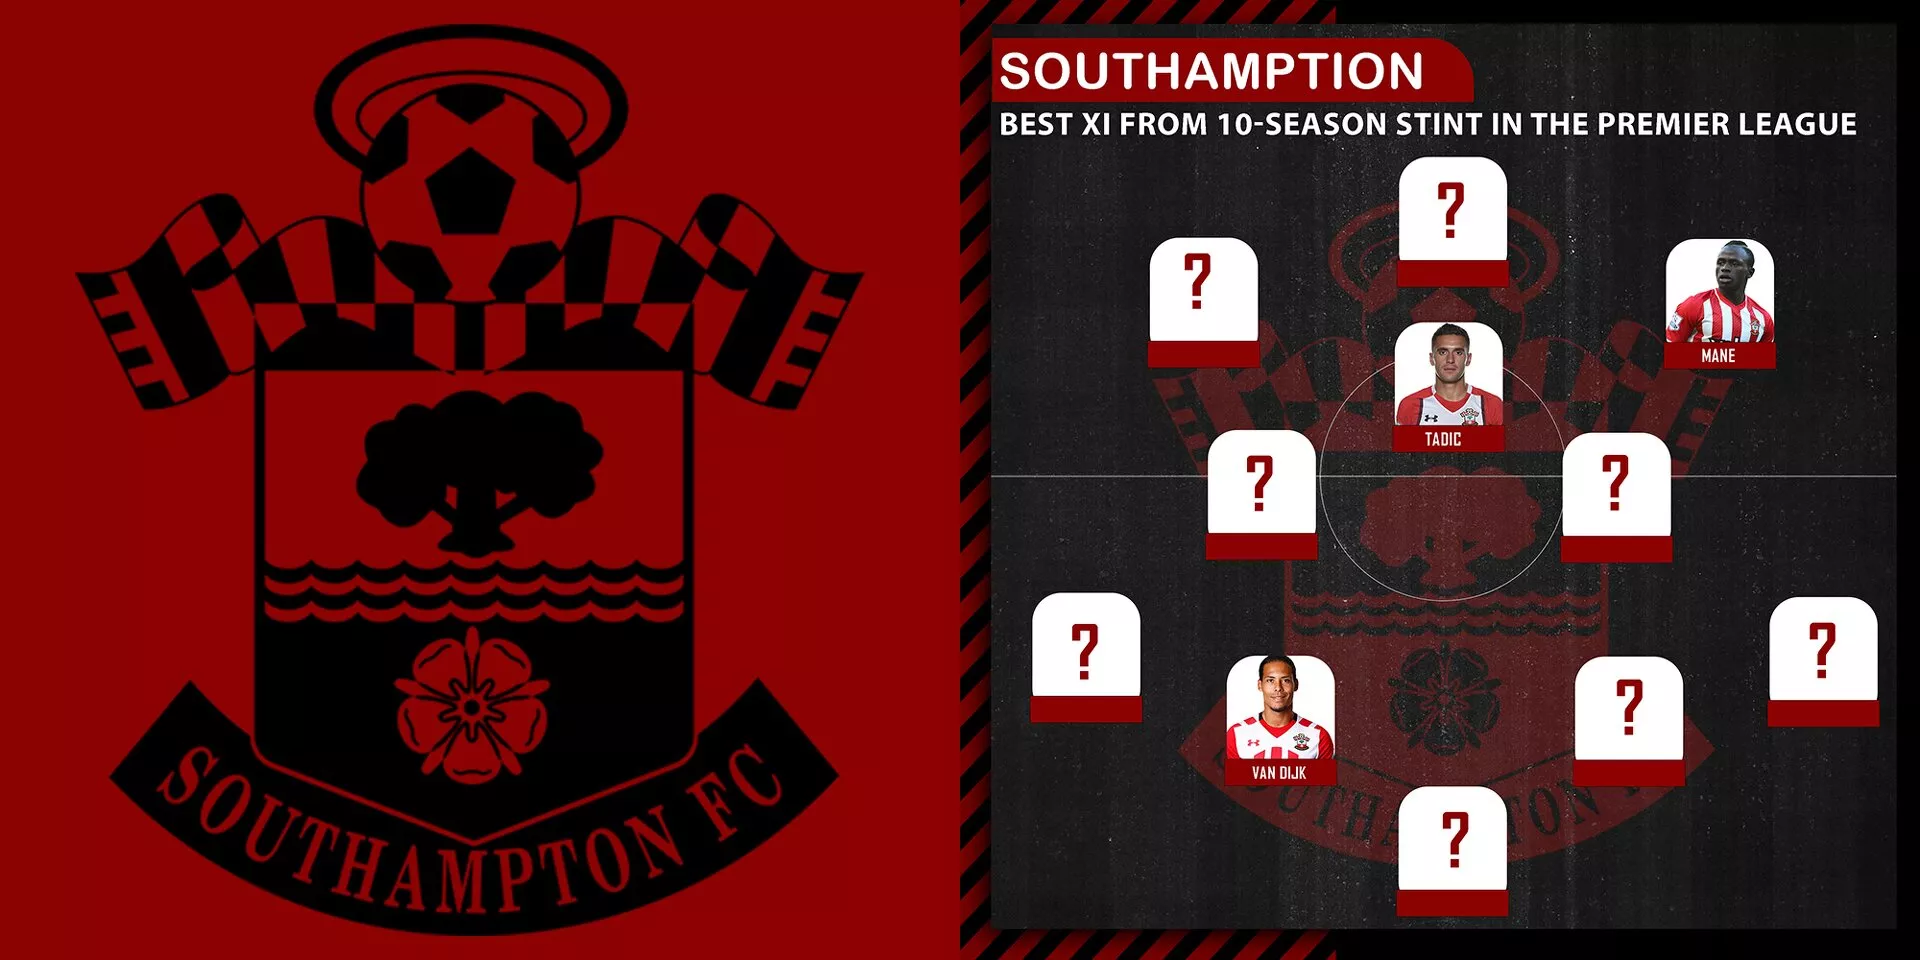 Southampton’s best XI from the 10-year Premier League stint